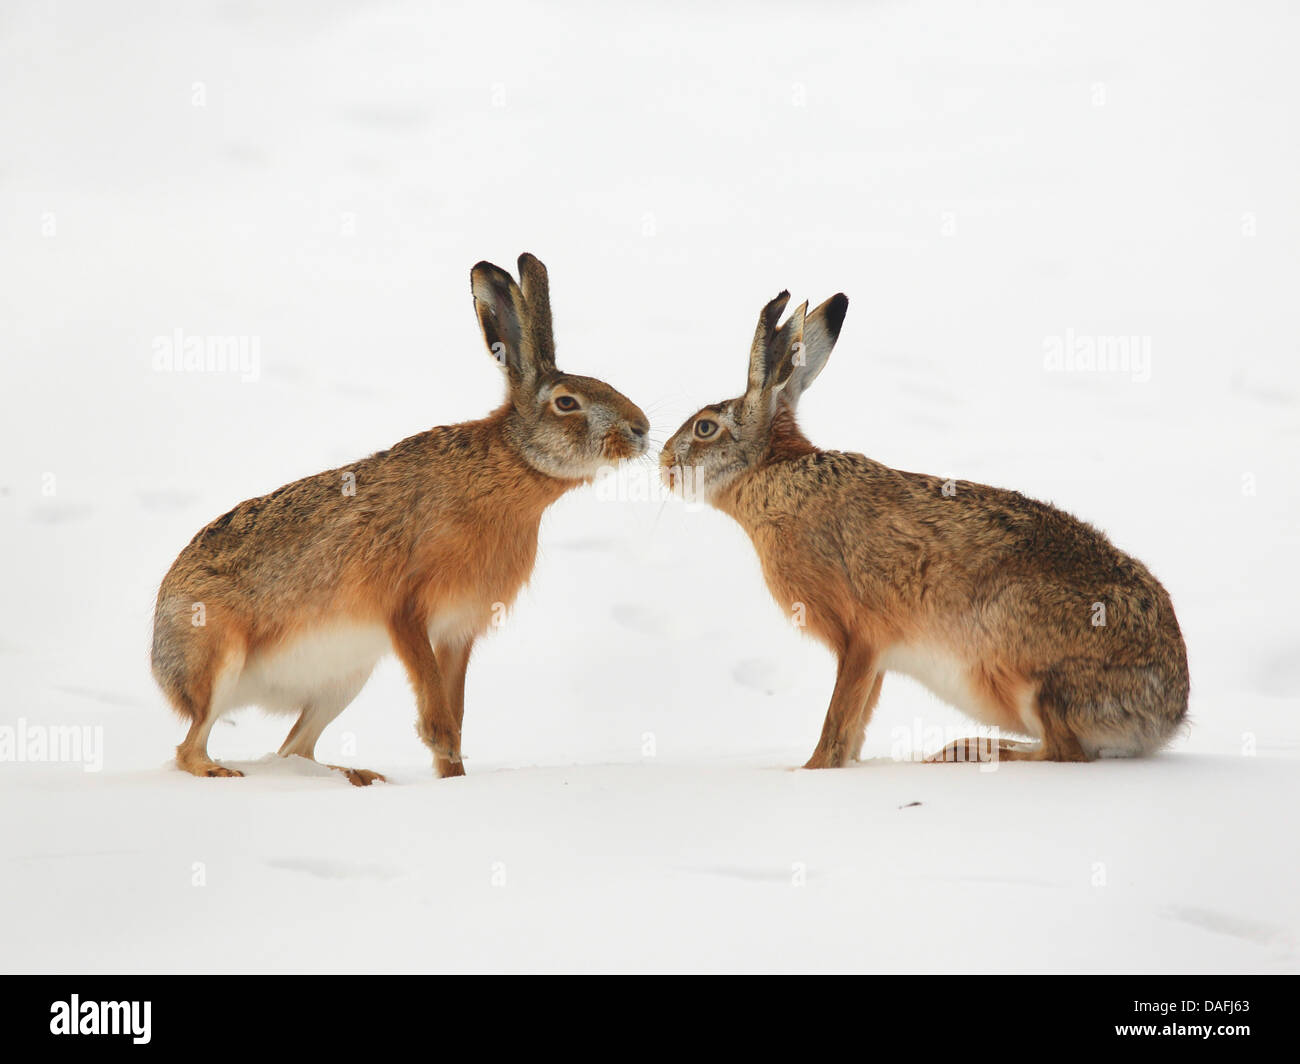 European hare, Brown hare (Lepus europaeus), two hares in snow  nosing at each other, Austria, Burgenland Stock Photo